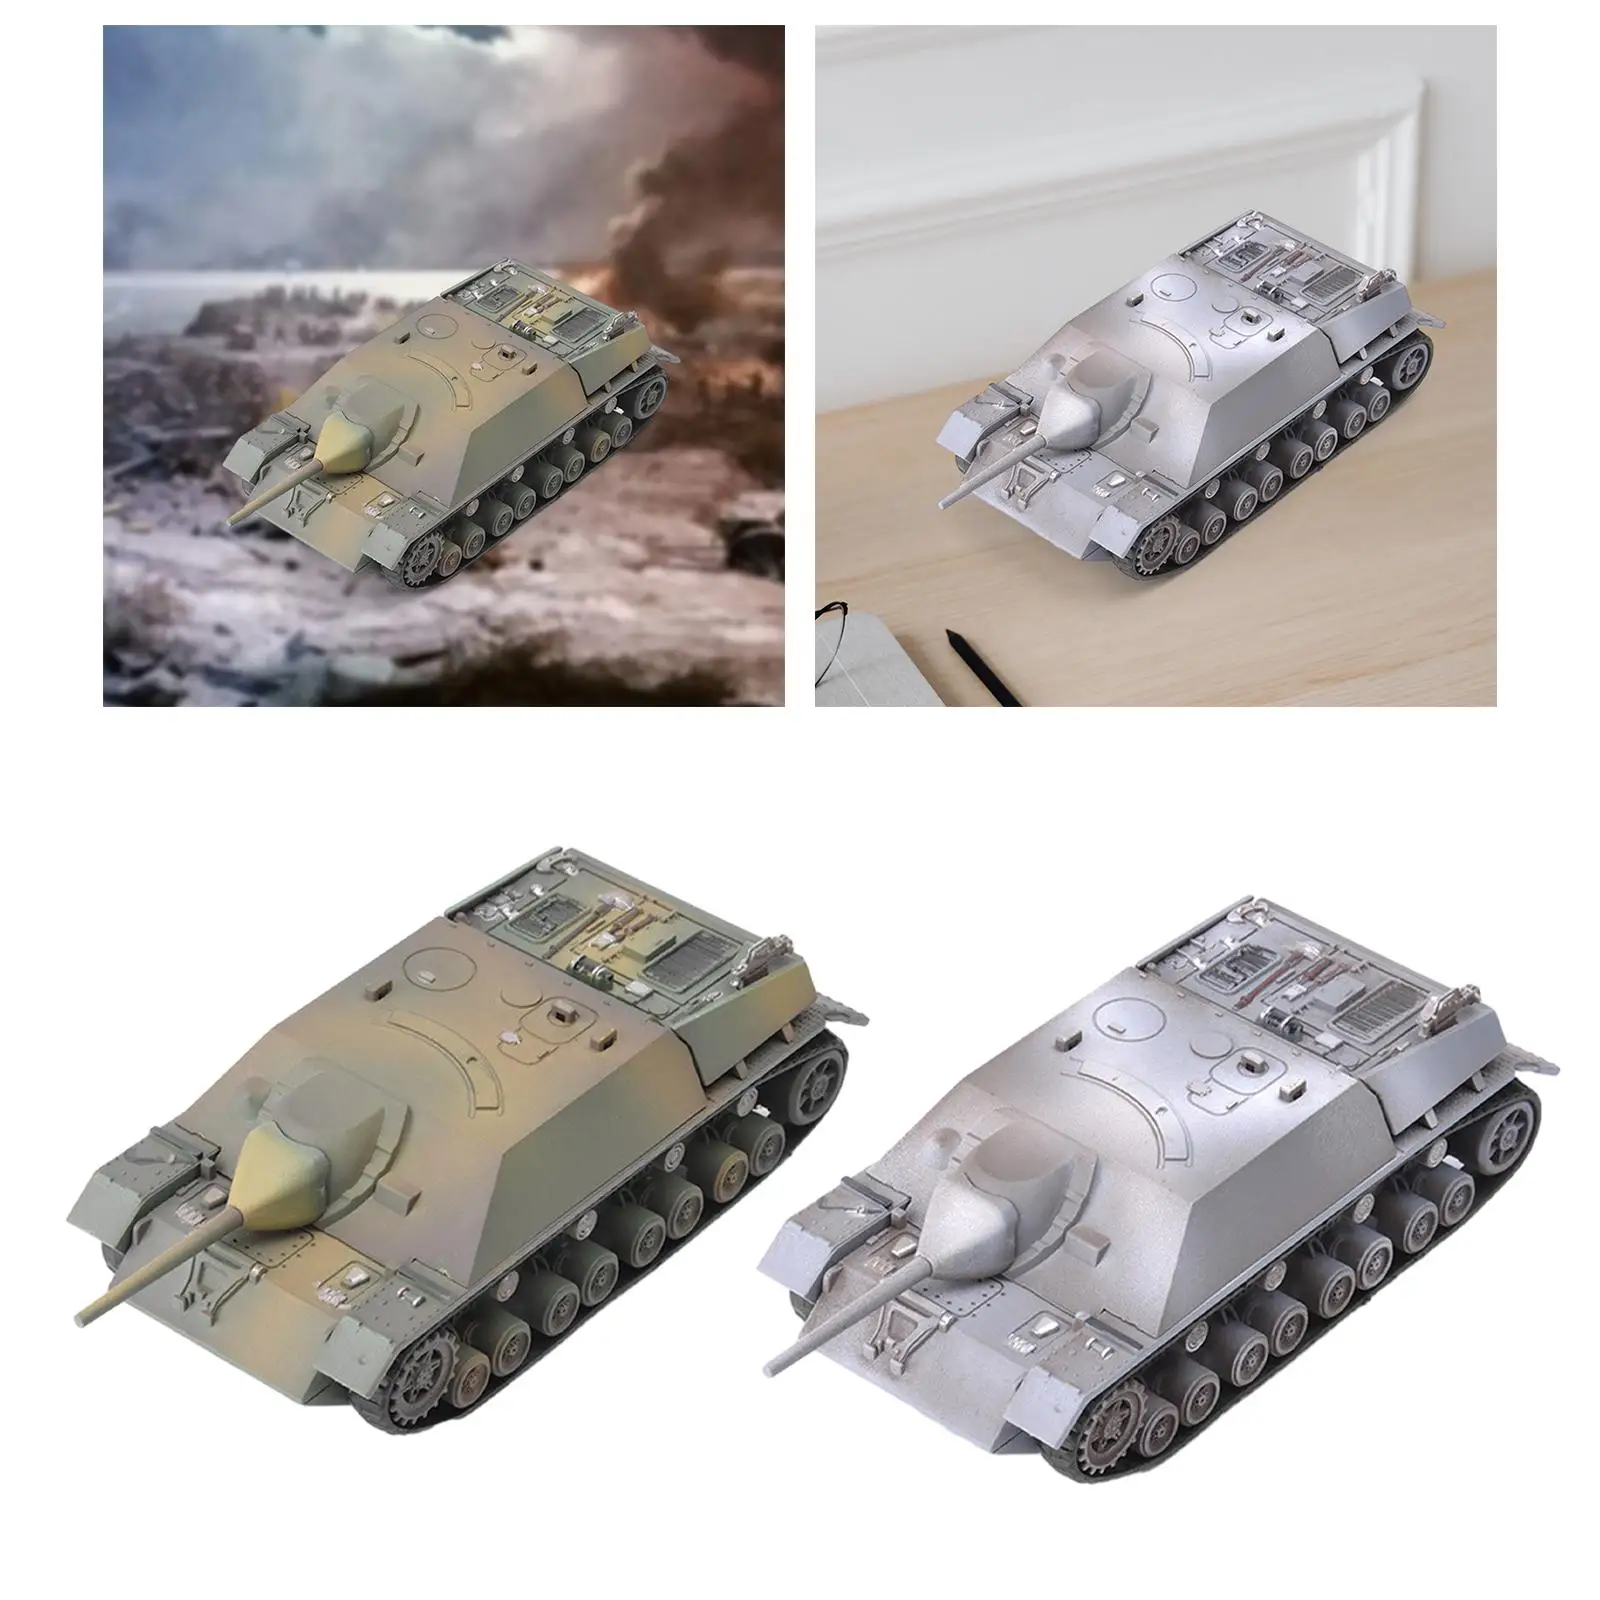 1:72 Scale Tank Model Kits DIY Assemble Table Scene Ornament Tabletop Decor Collectible for Adults Kids Children Boy Gifts